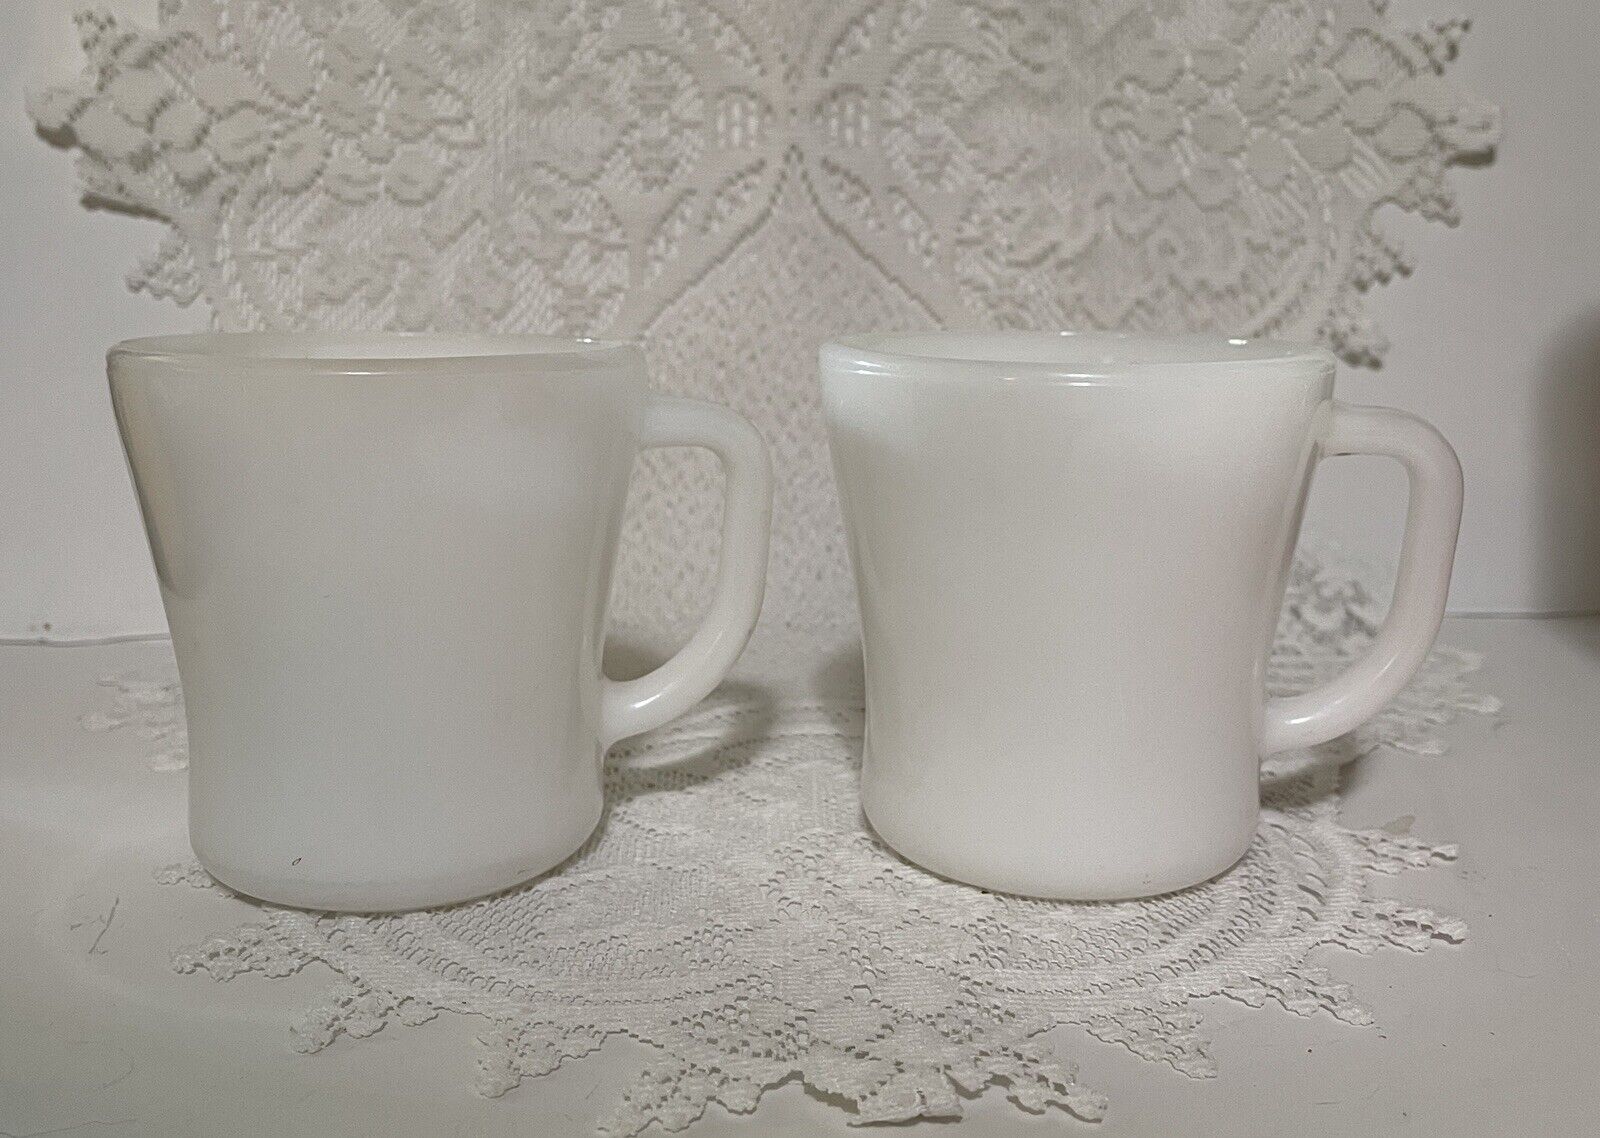 2 Vintage Federal Coffee Mugs Cup White Milk Glass Heat Proof USA